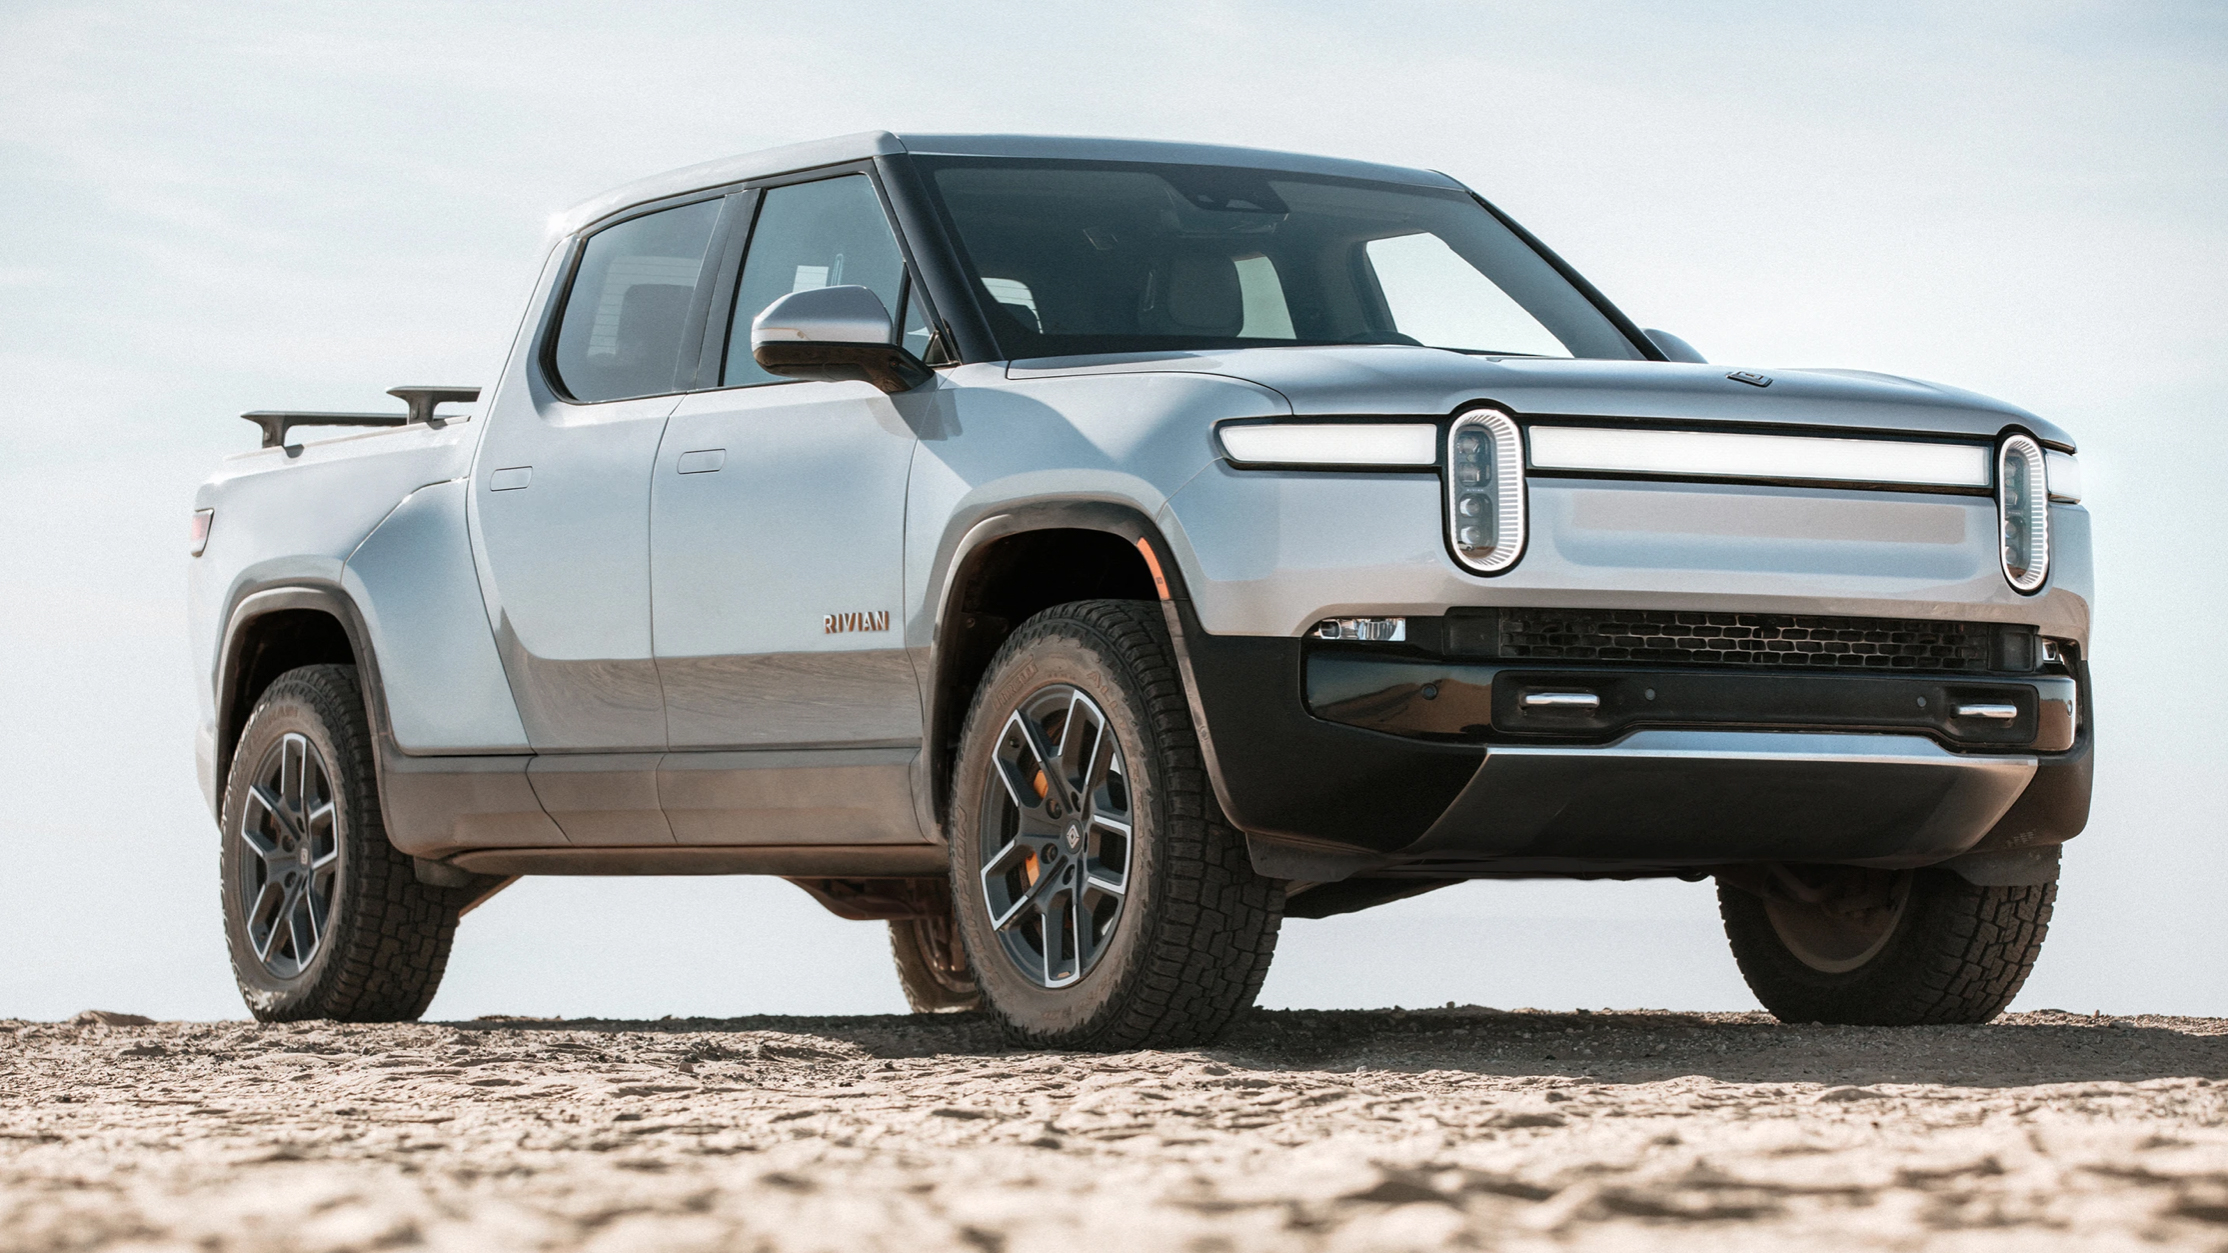 The Rivian R1T parked on a rocky outcrop